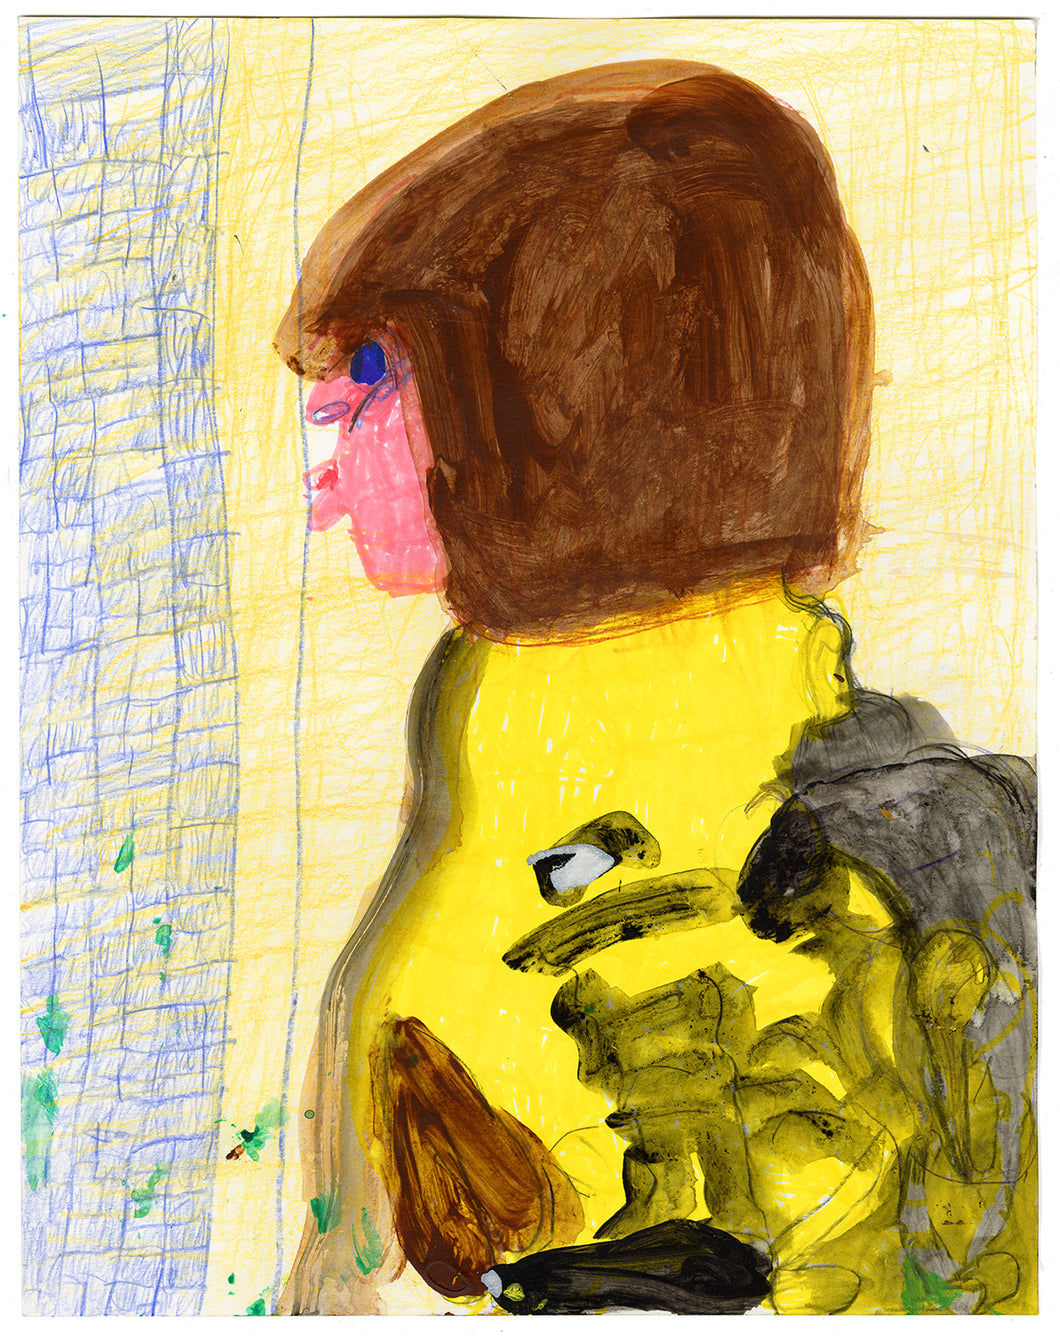 Janice Essick, Untitled (Figure with Brown Hair)